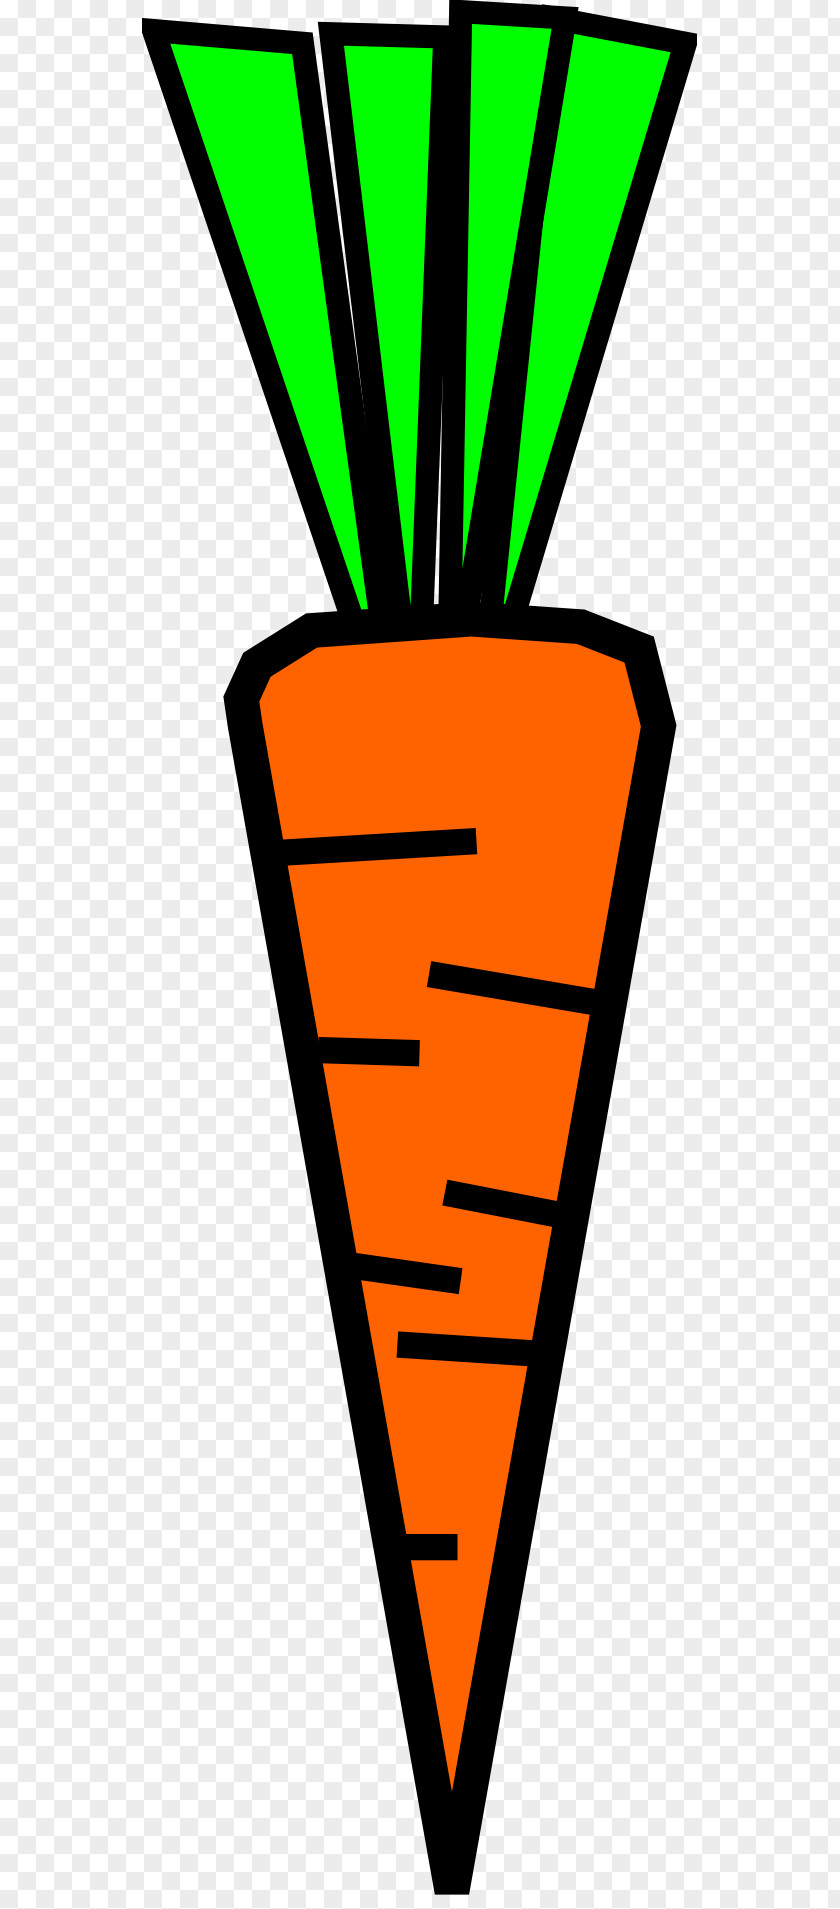 Pictures Of Carrots Carrot Free Content Stock.xchng Clip Art PNG